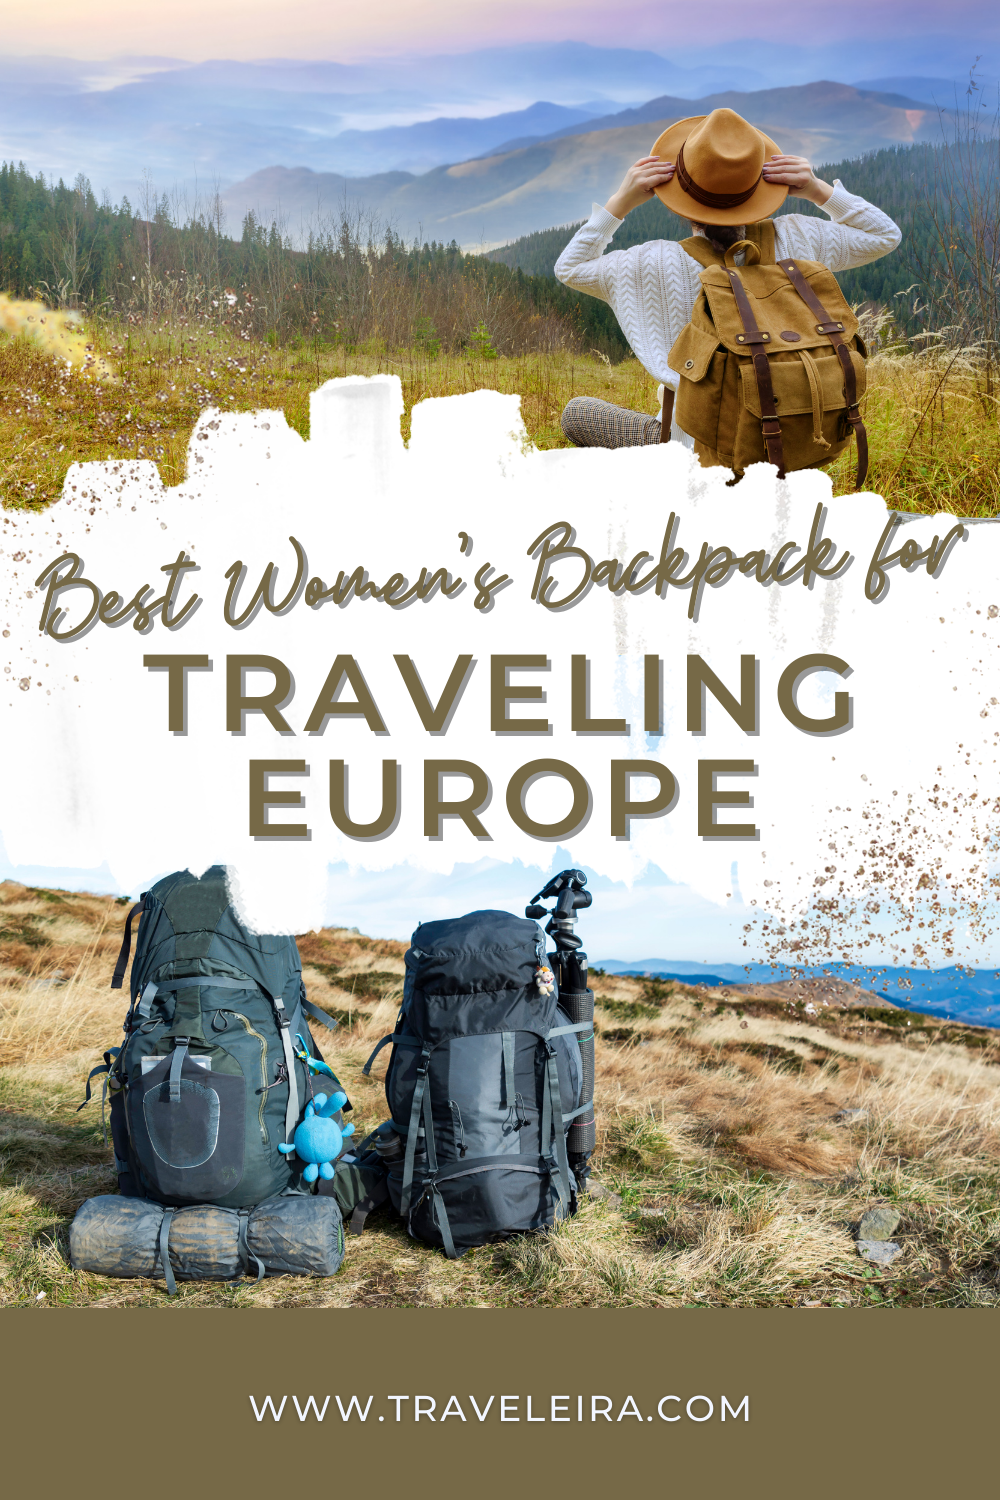 Find your perfect travel companion! Explore the best women's backpack for traveling Europe, and weigh their pros and cons. Don't miss out! ????✈️